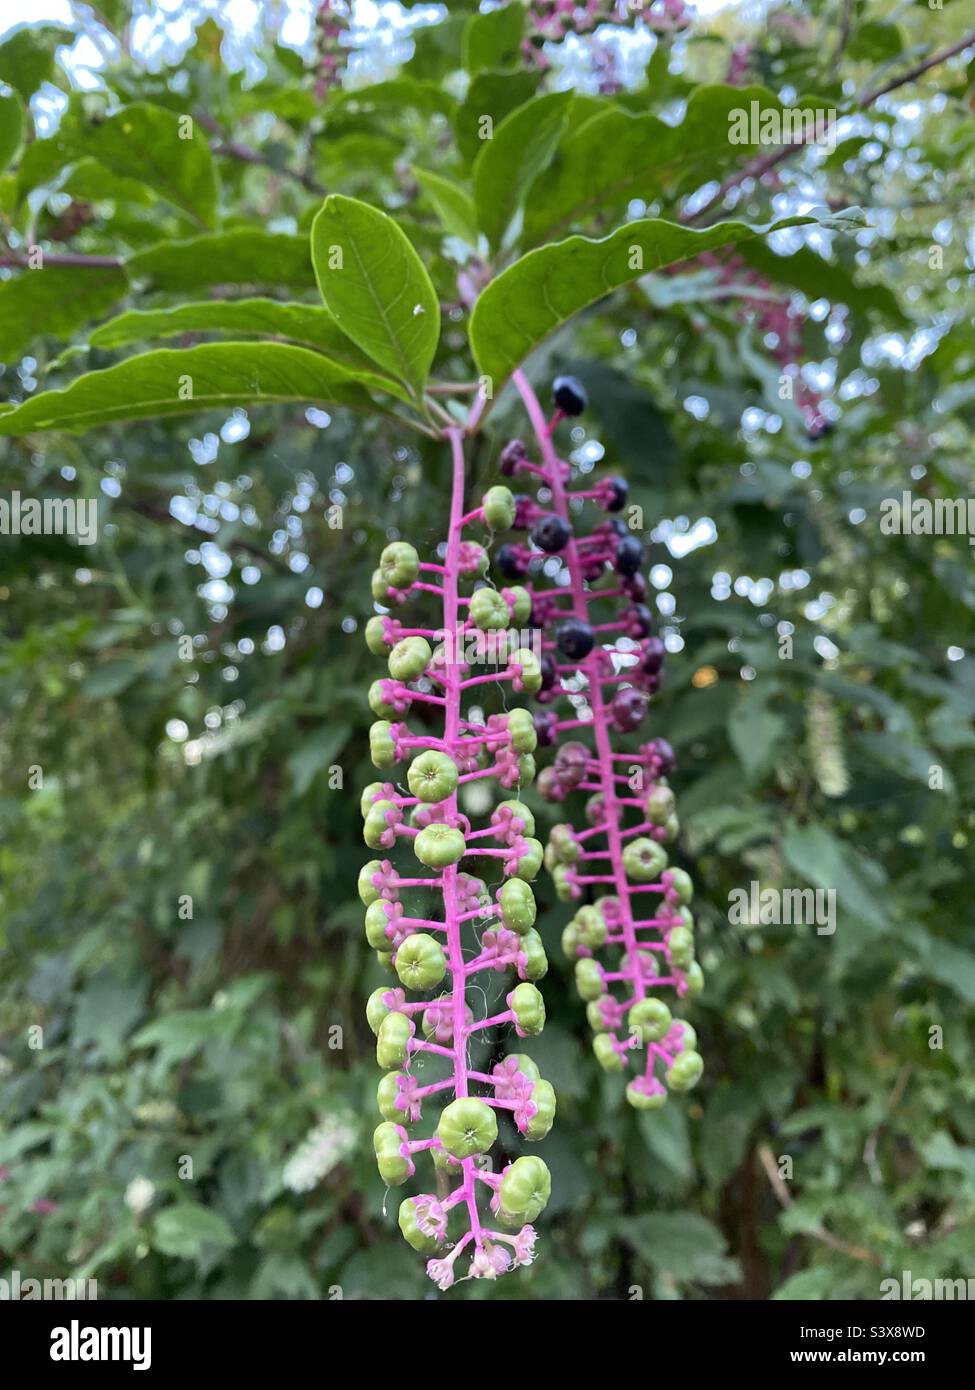 Phytolacca americana, also known as American pokeweed, pokeweed, poke sallet, dragonberries, and inkberry, is a poisonous, herbaceous perennial plant in the pokeweed family Phytolaccaceae. Stock Photo